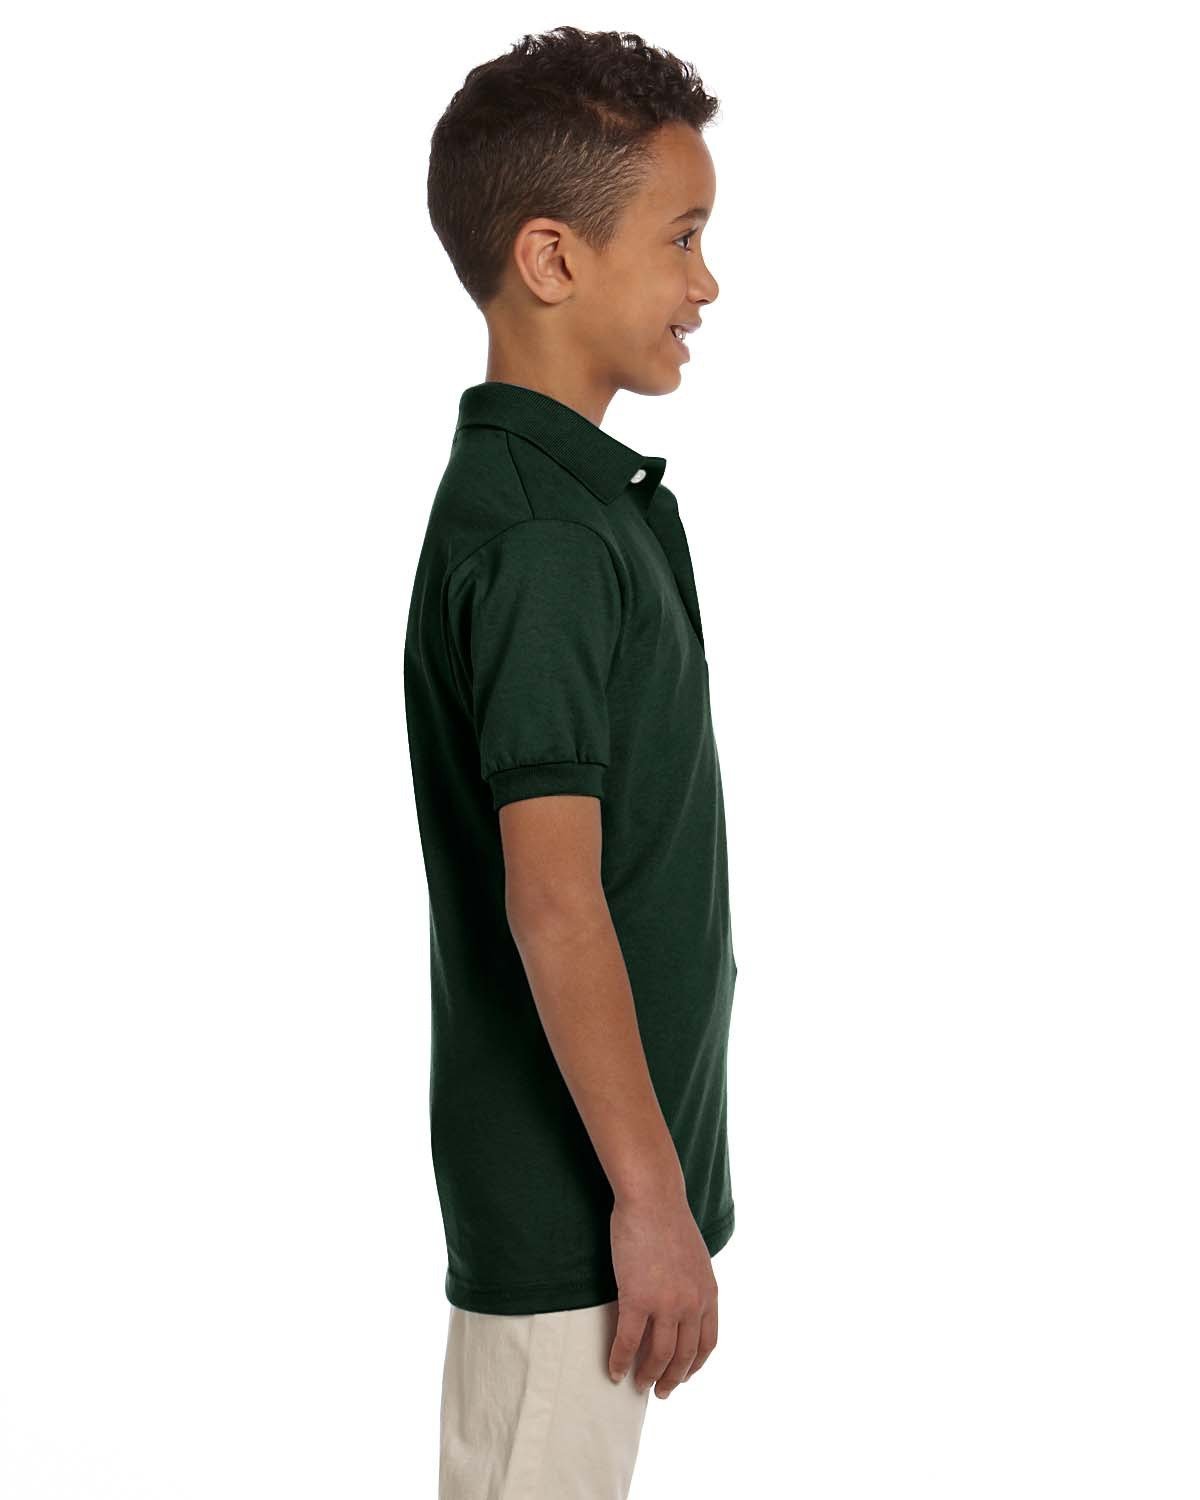 437Y-Jerzees-FOREST GREEN-Jerzees-Polos-3